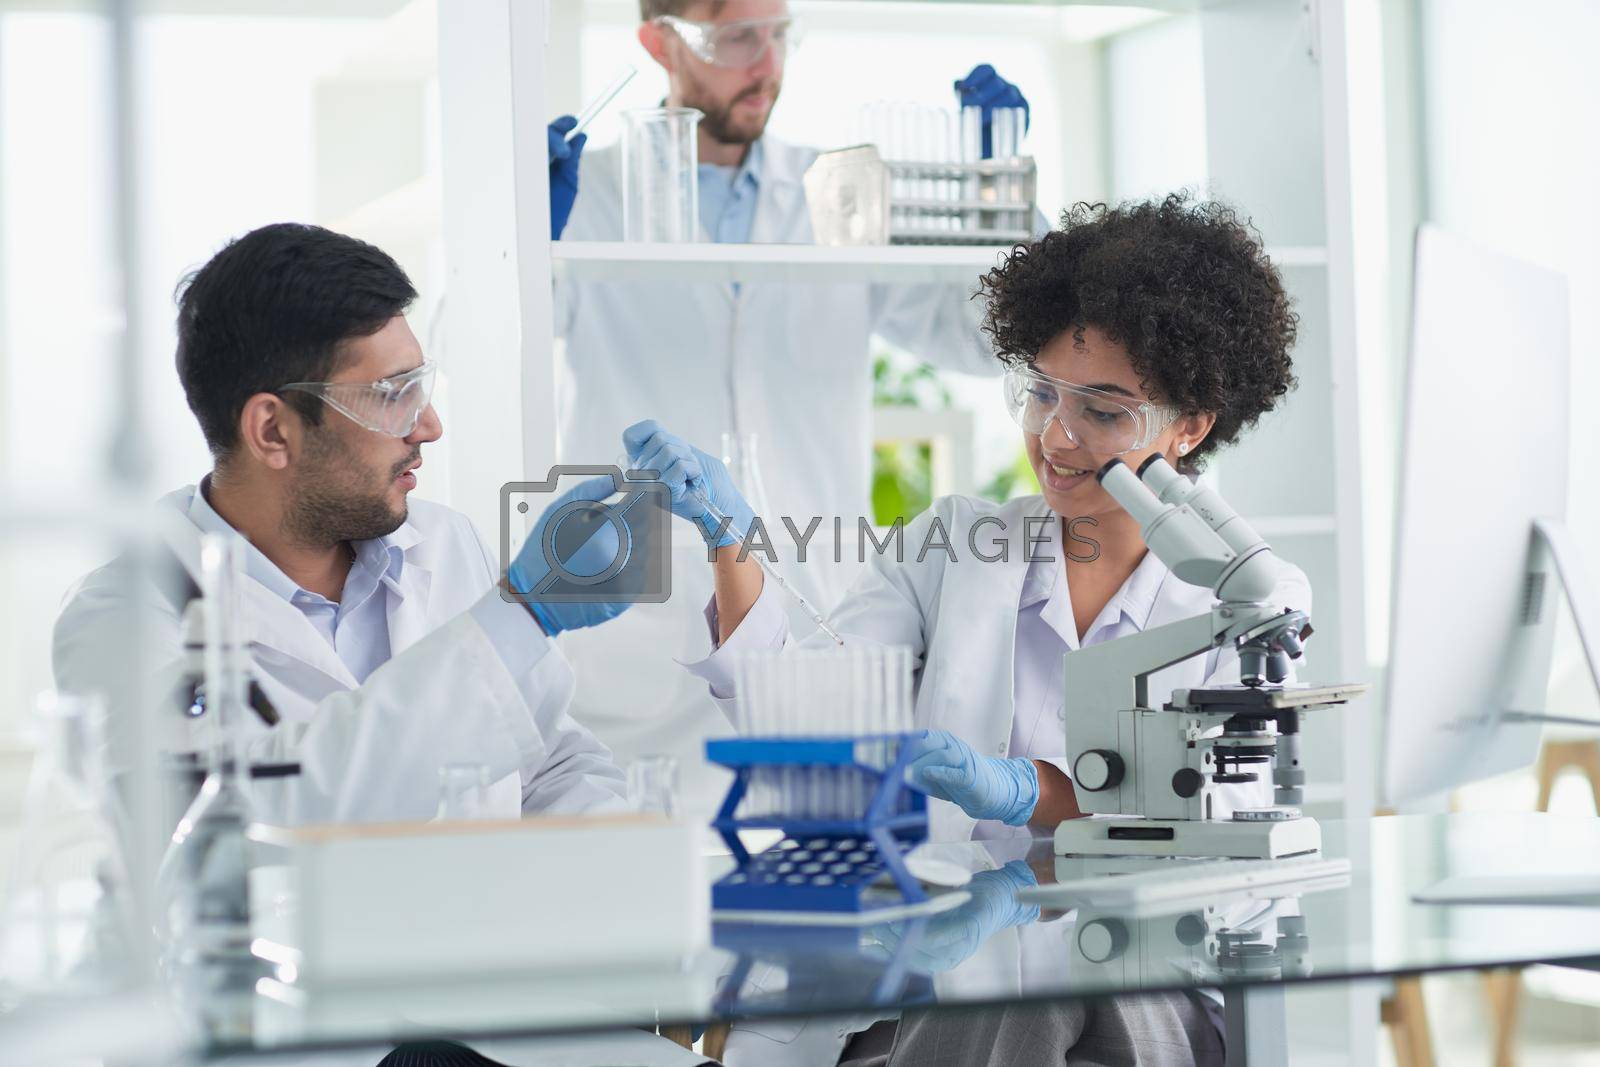 Royalty free image of Team of Medical Research Scientists Working on Generation Experimental Drug by asdf